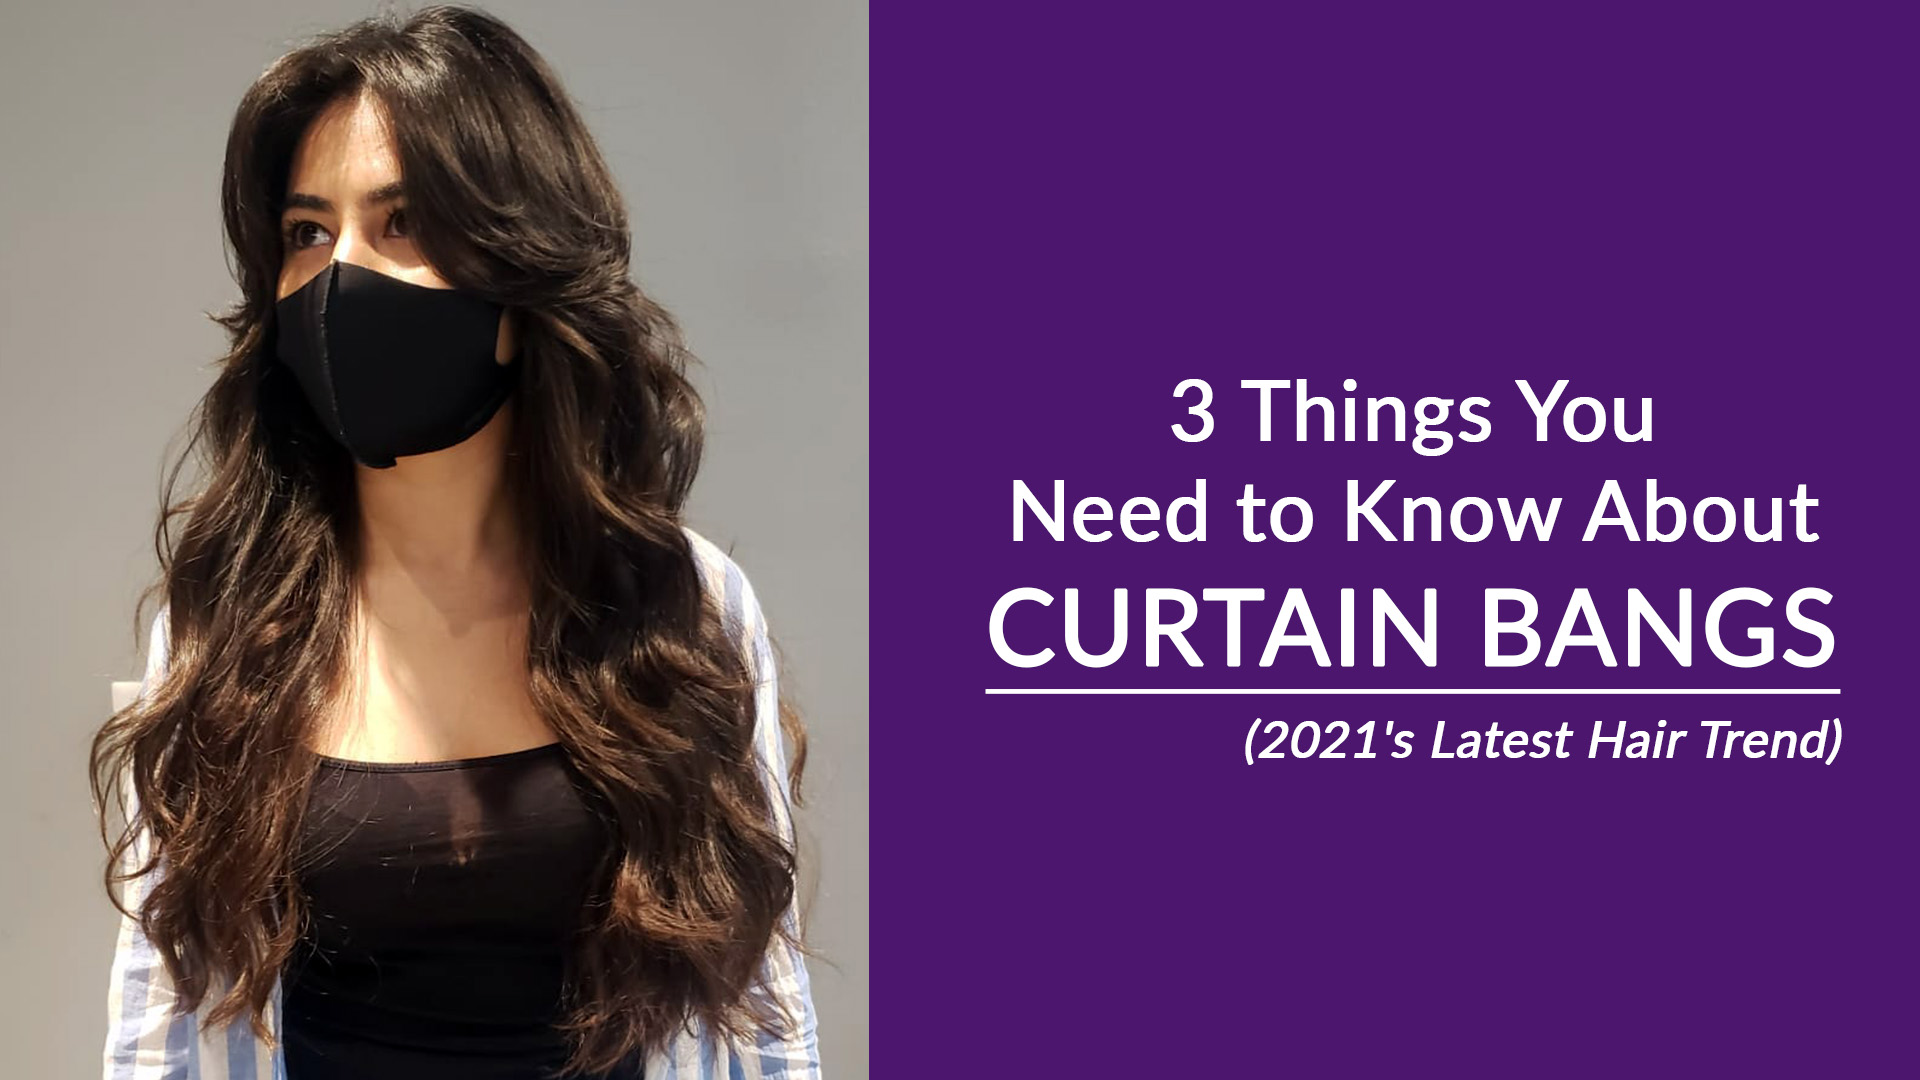 3 Things You Need to Know About Curtain Bangs | Salon Nirvana 954